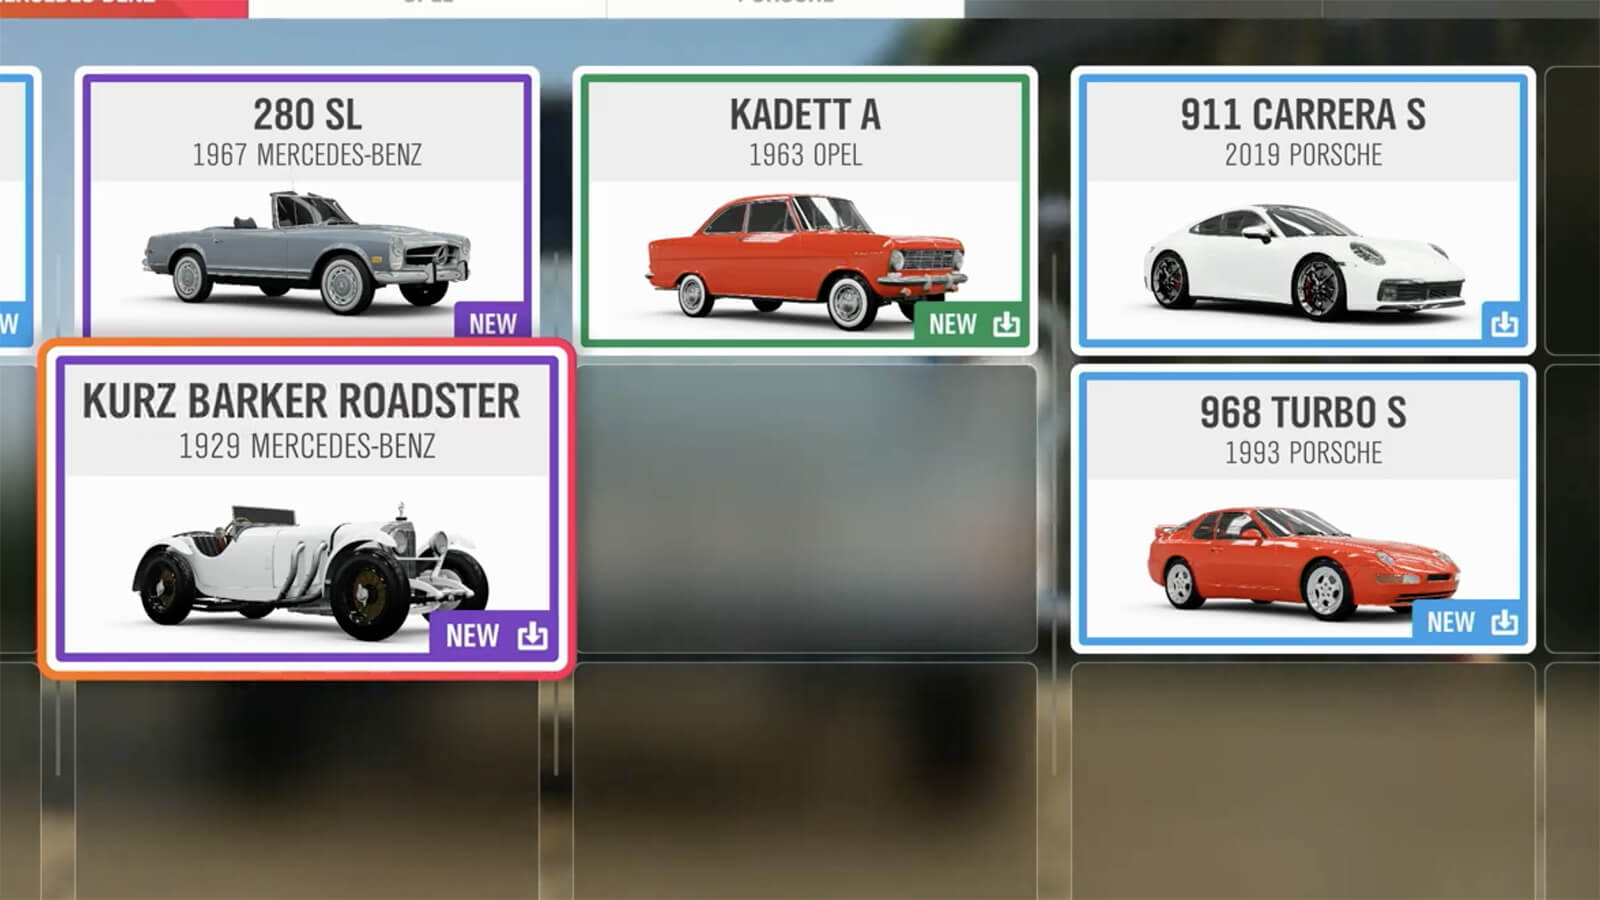 Forza Horizon 4 Series 6 Car Pass Revealed: TVR Griffith and a Big